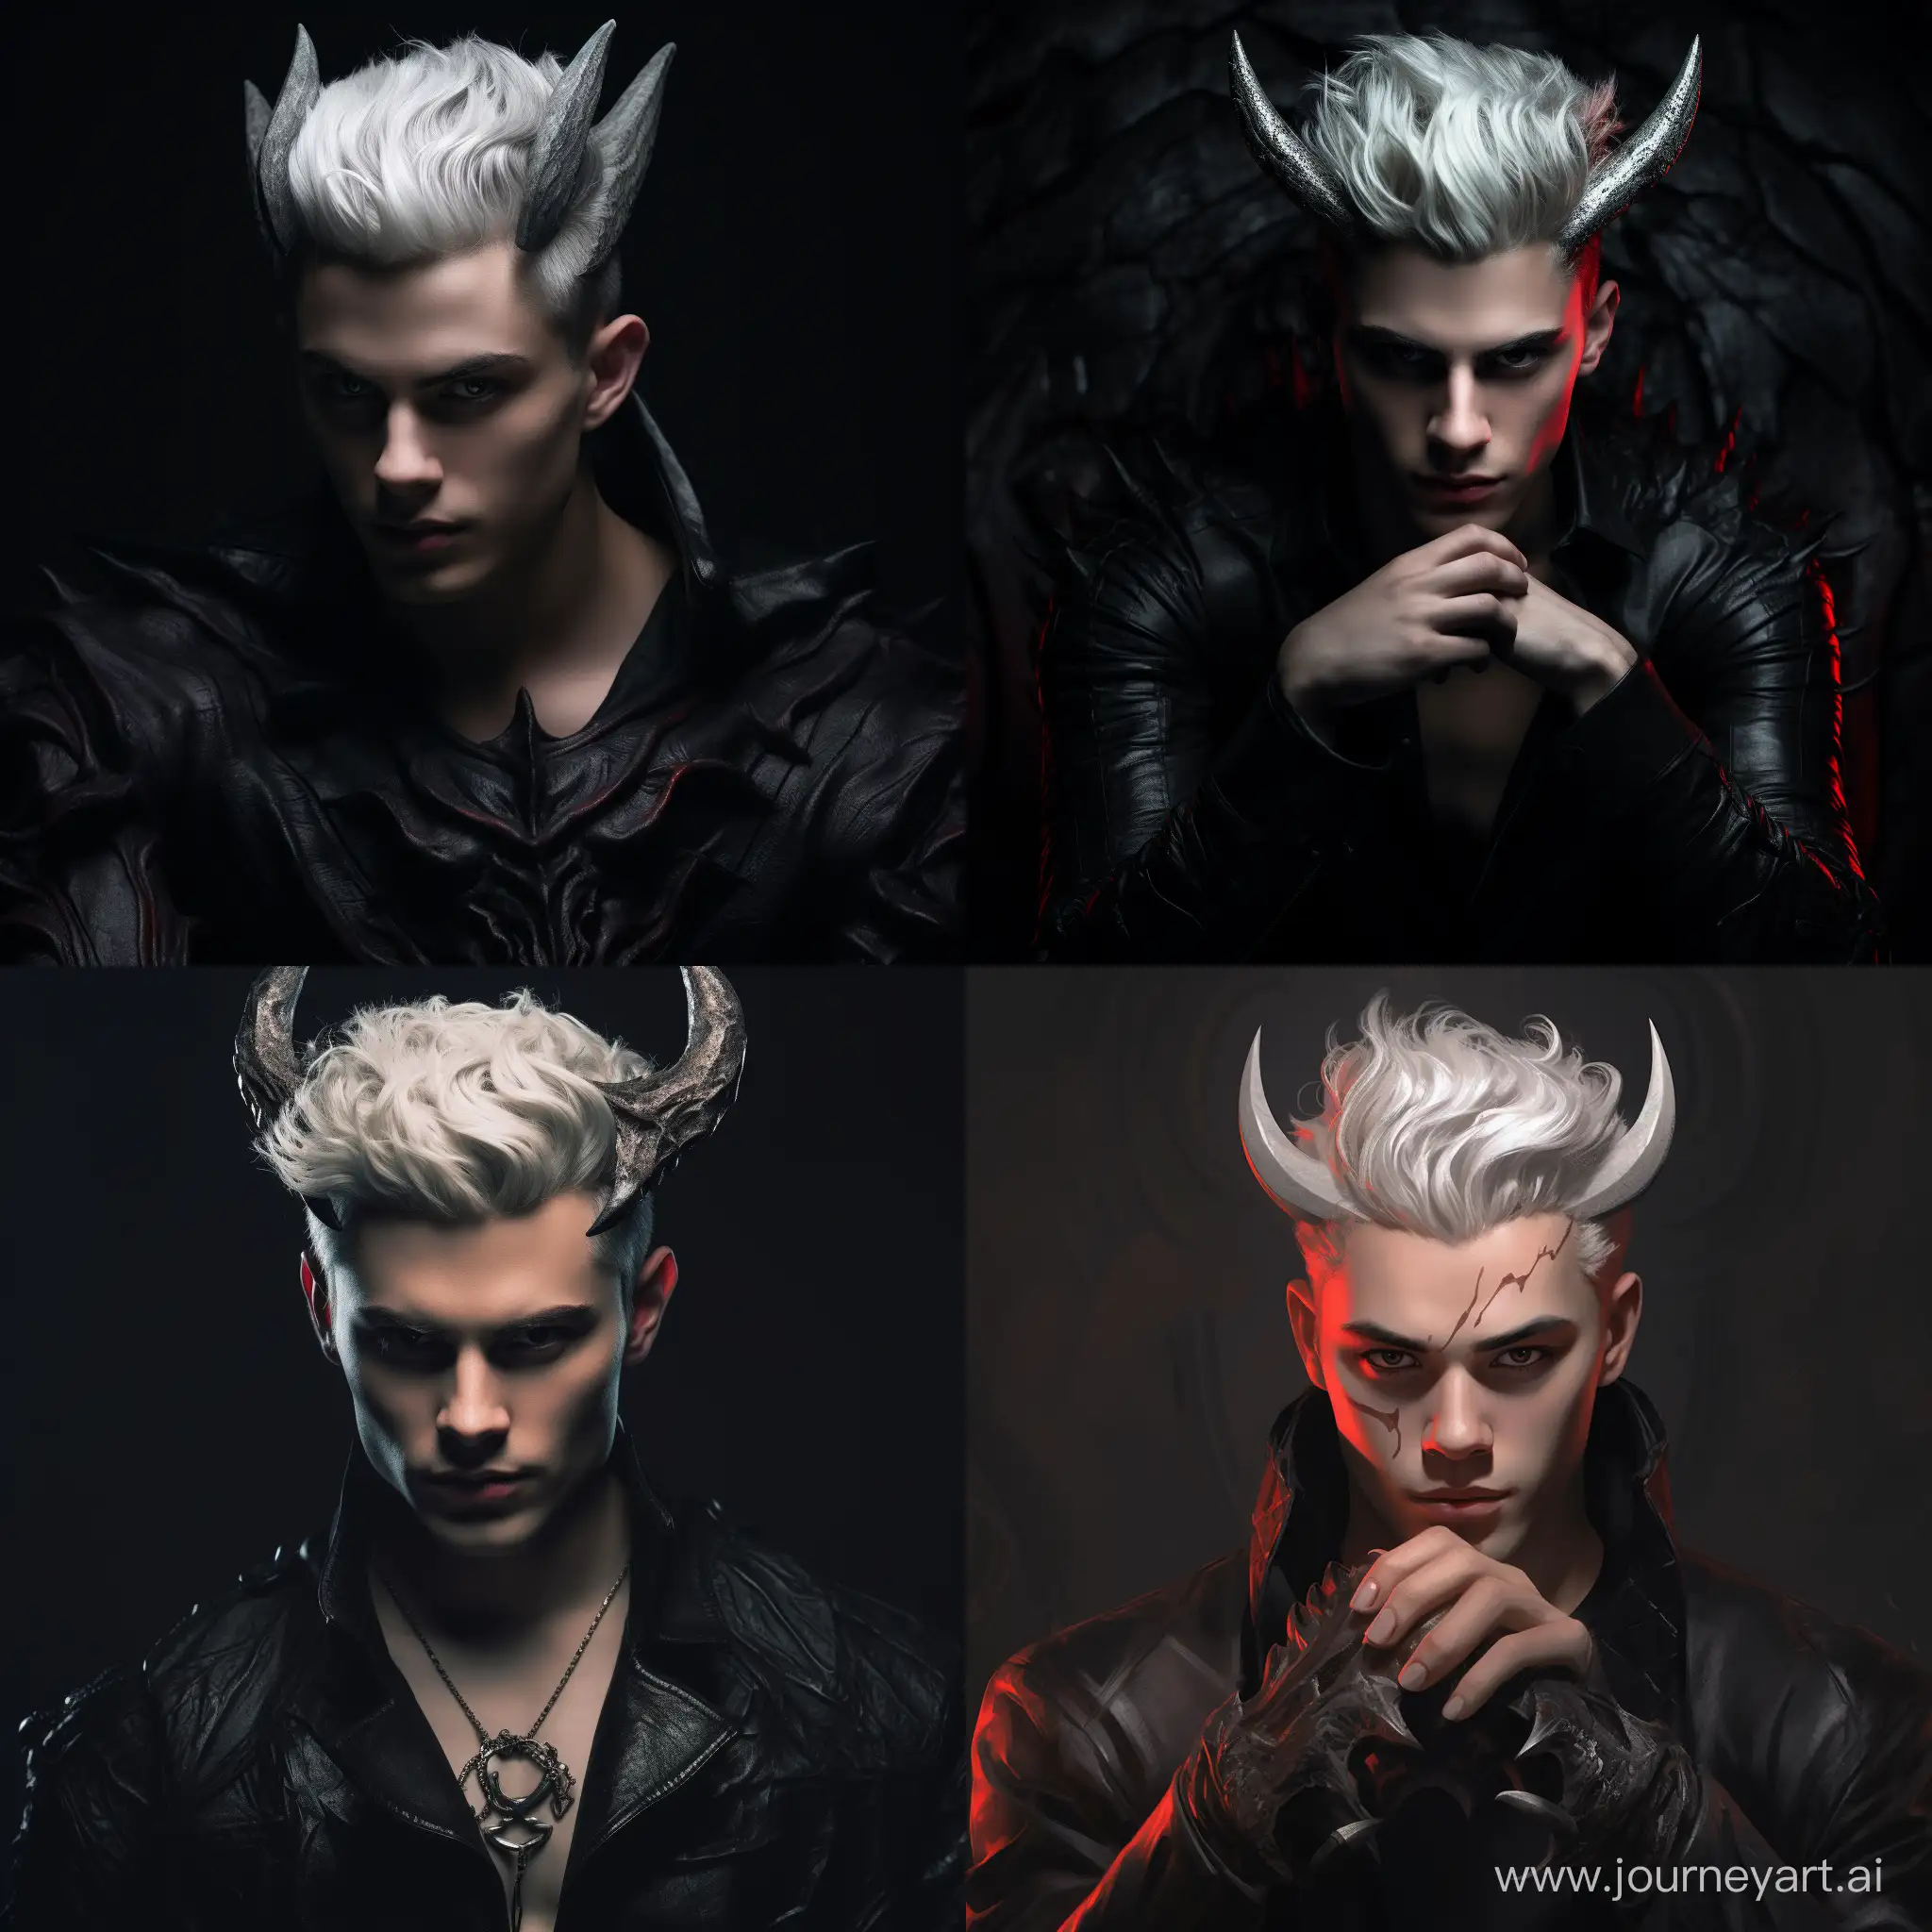 A handsome young man with short white hair, red eyes and black horns on his head along with claws for hands